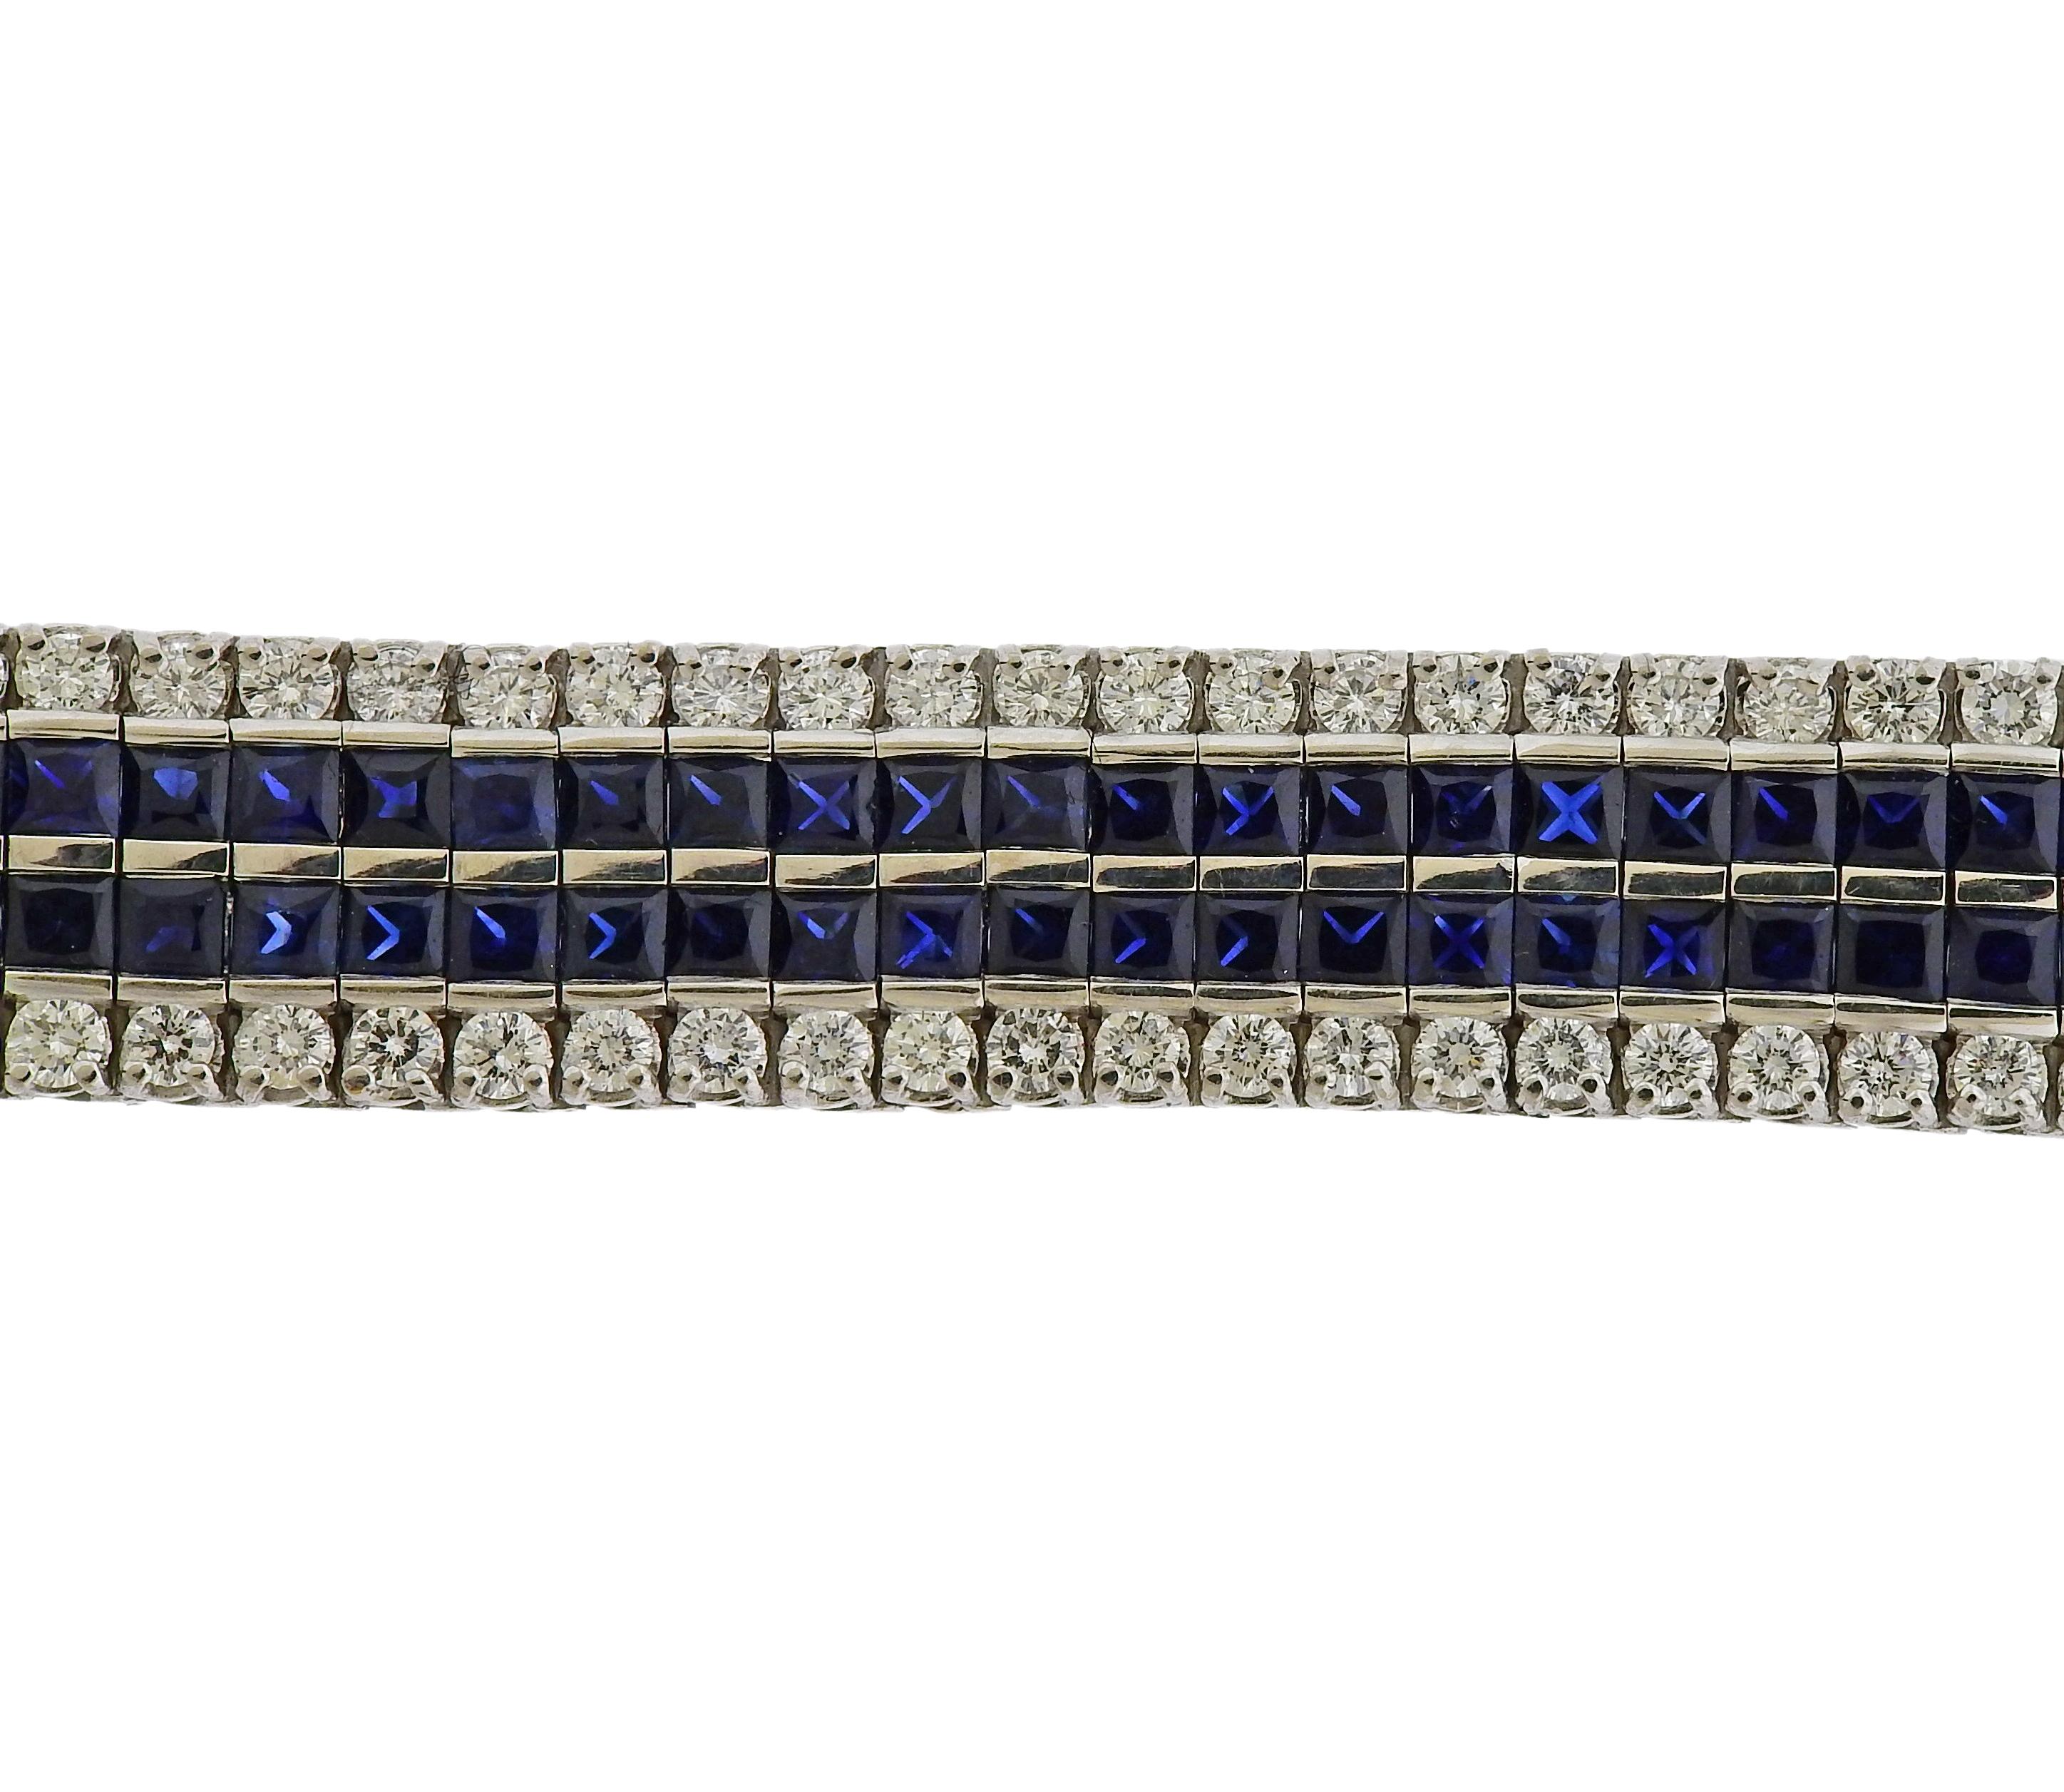 Platinum bracelet, featuring two rows of French cut blue sapphires and approx. 7.20ctw in diamonds. Bracelet is 7